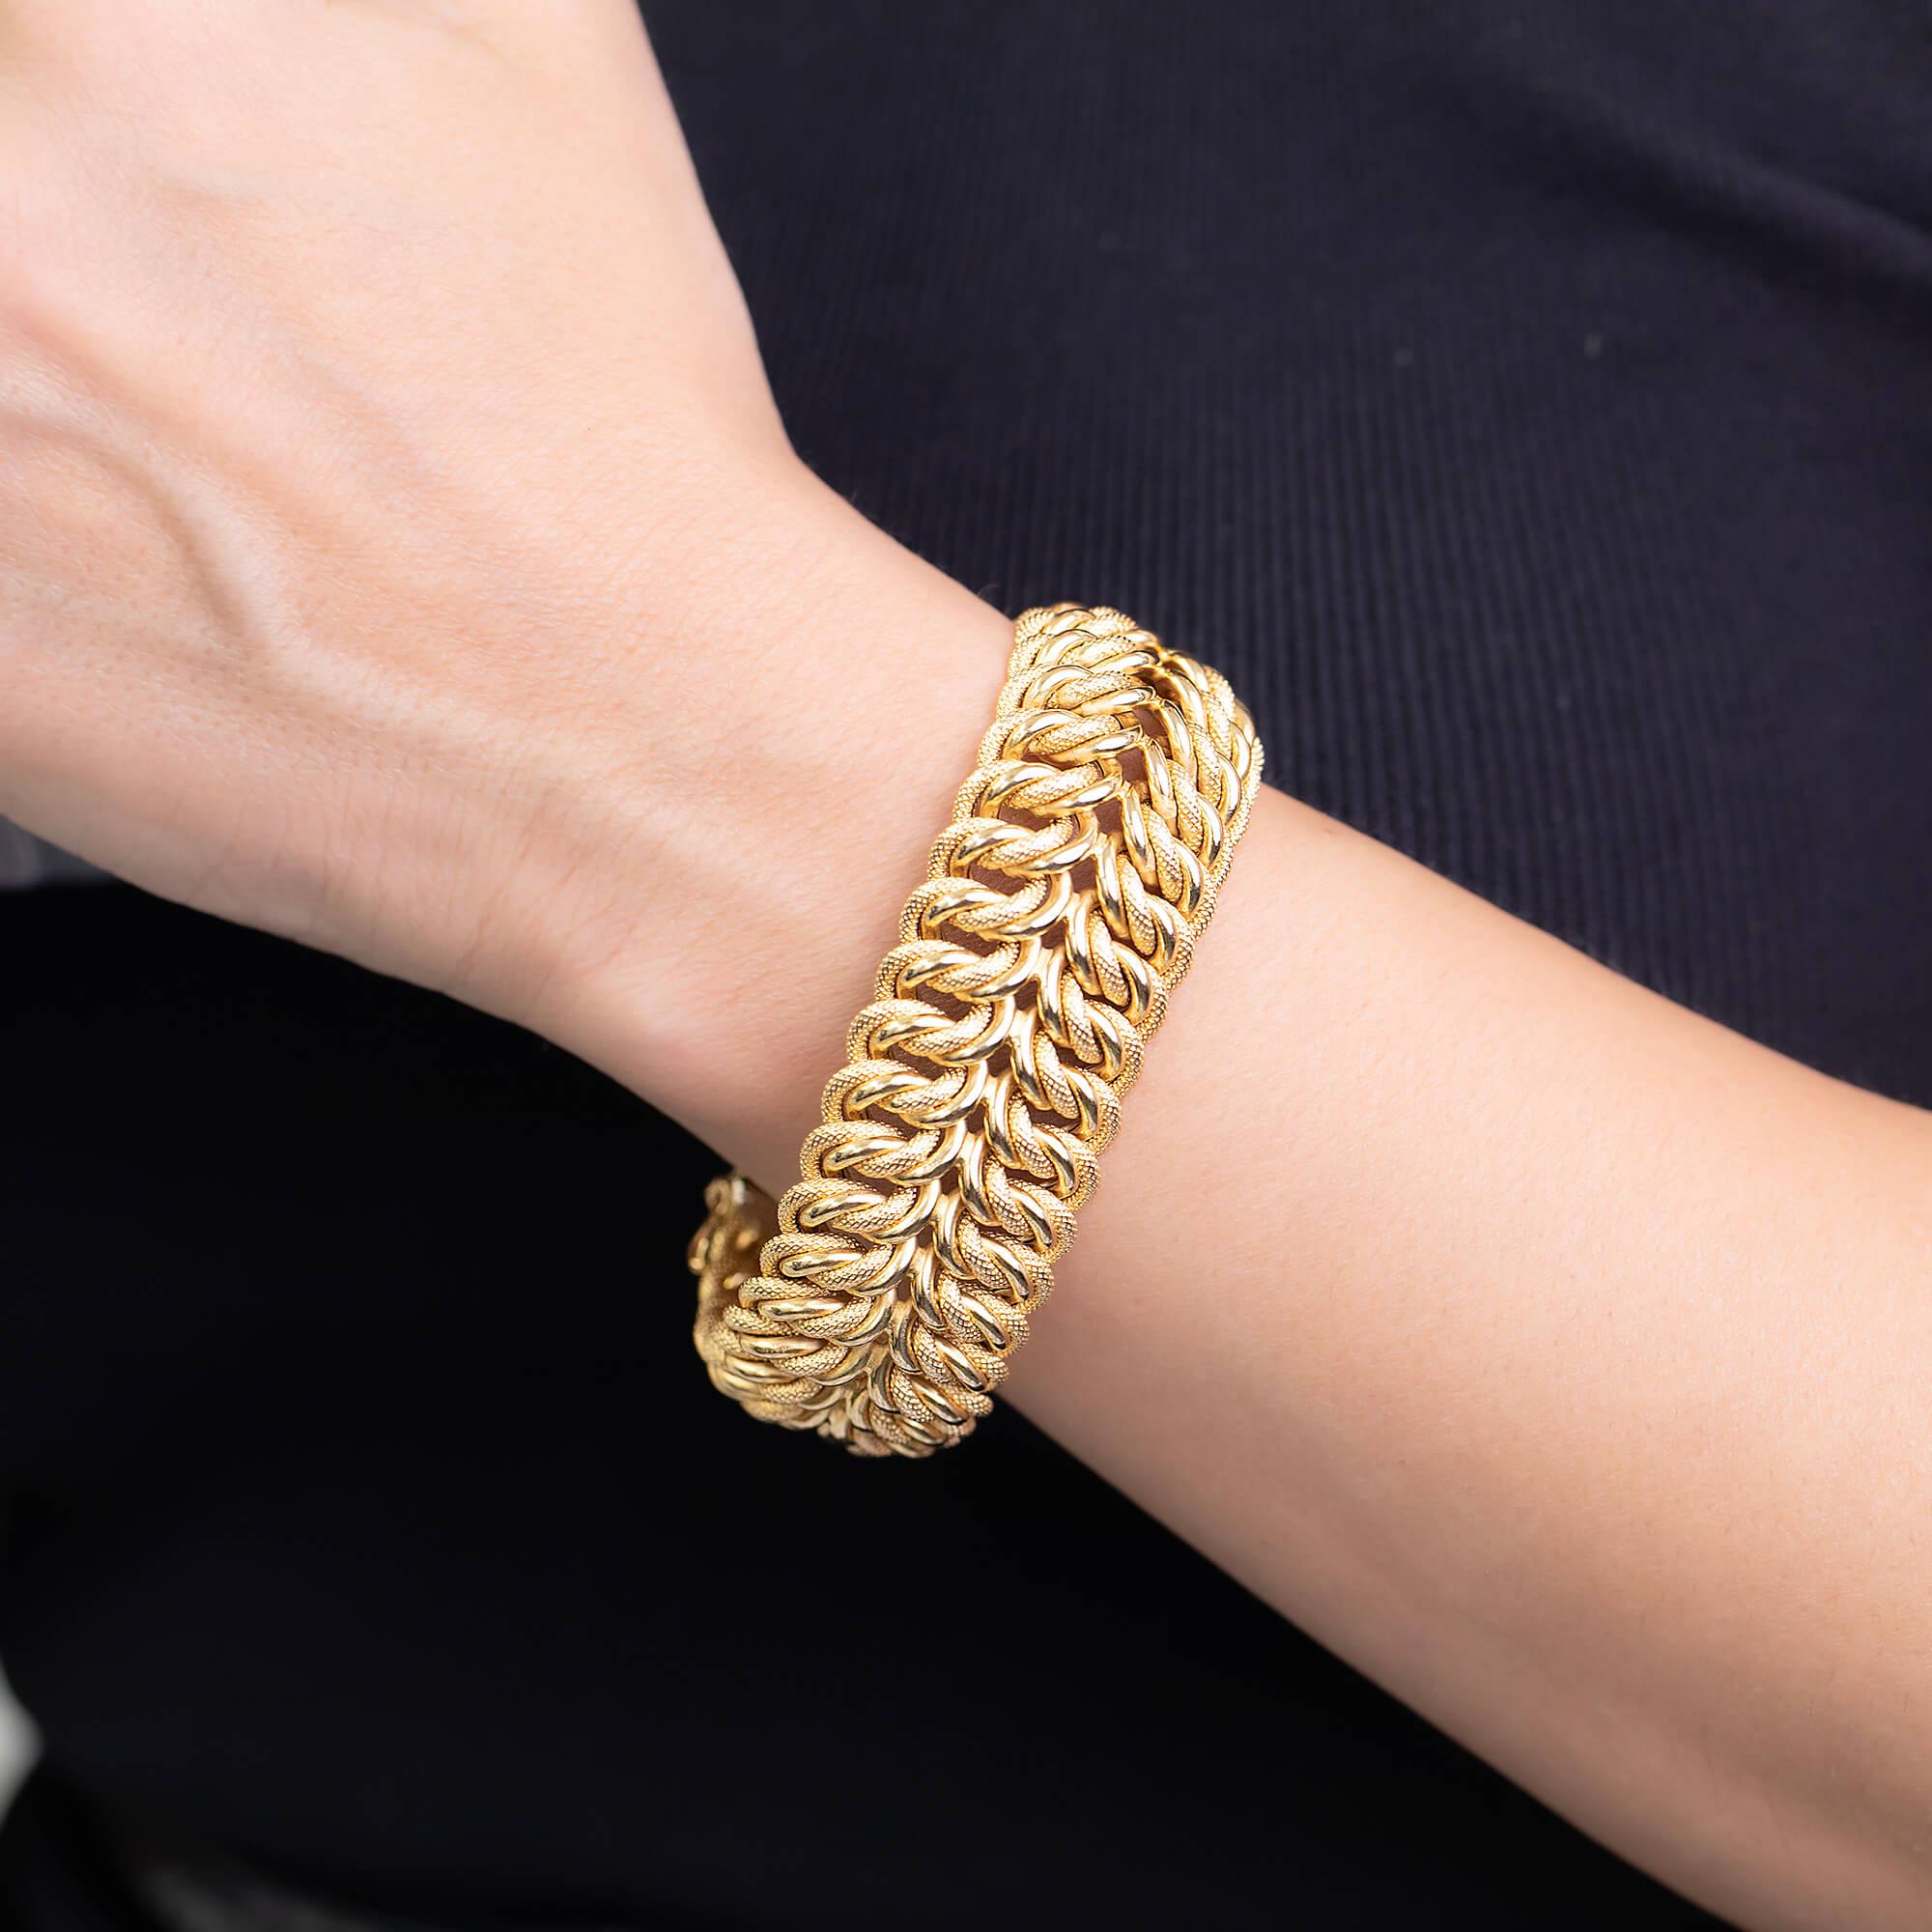 One Retro style 18k yellow gold wide woven bracelet with fancy plain and embossed mesh. This bracelet is secured by large box catch and two figure eight clasps on each side. The clasp is stamped with a with makers mark 